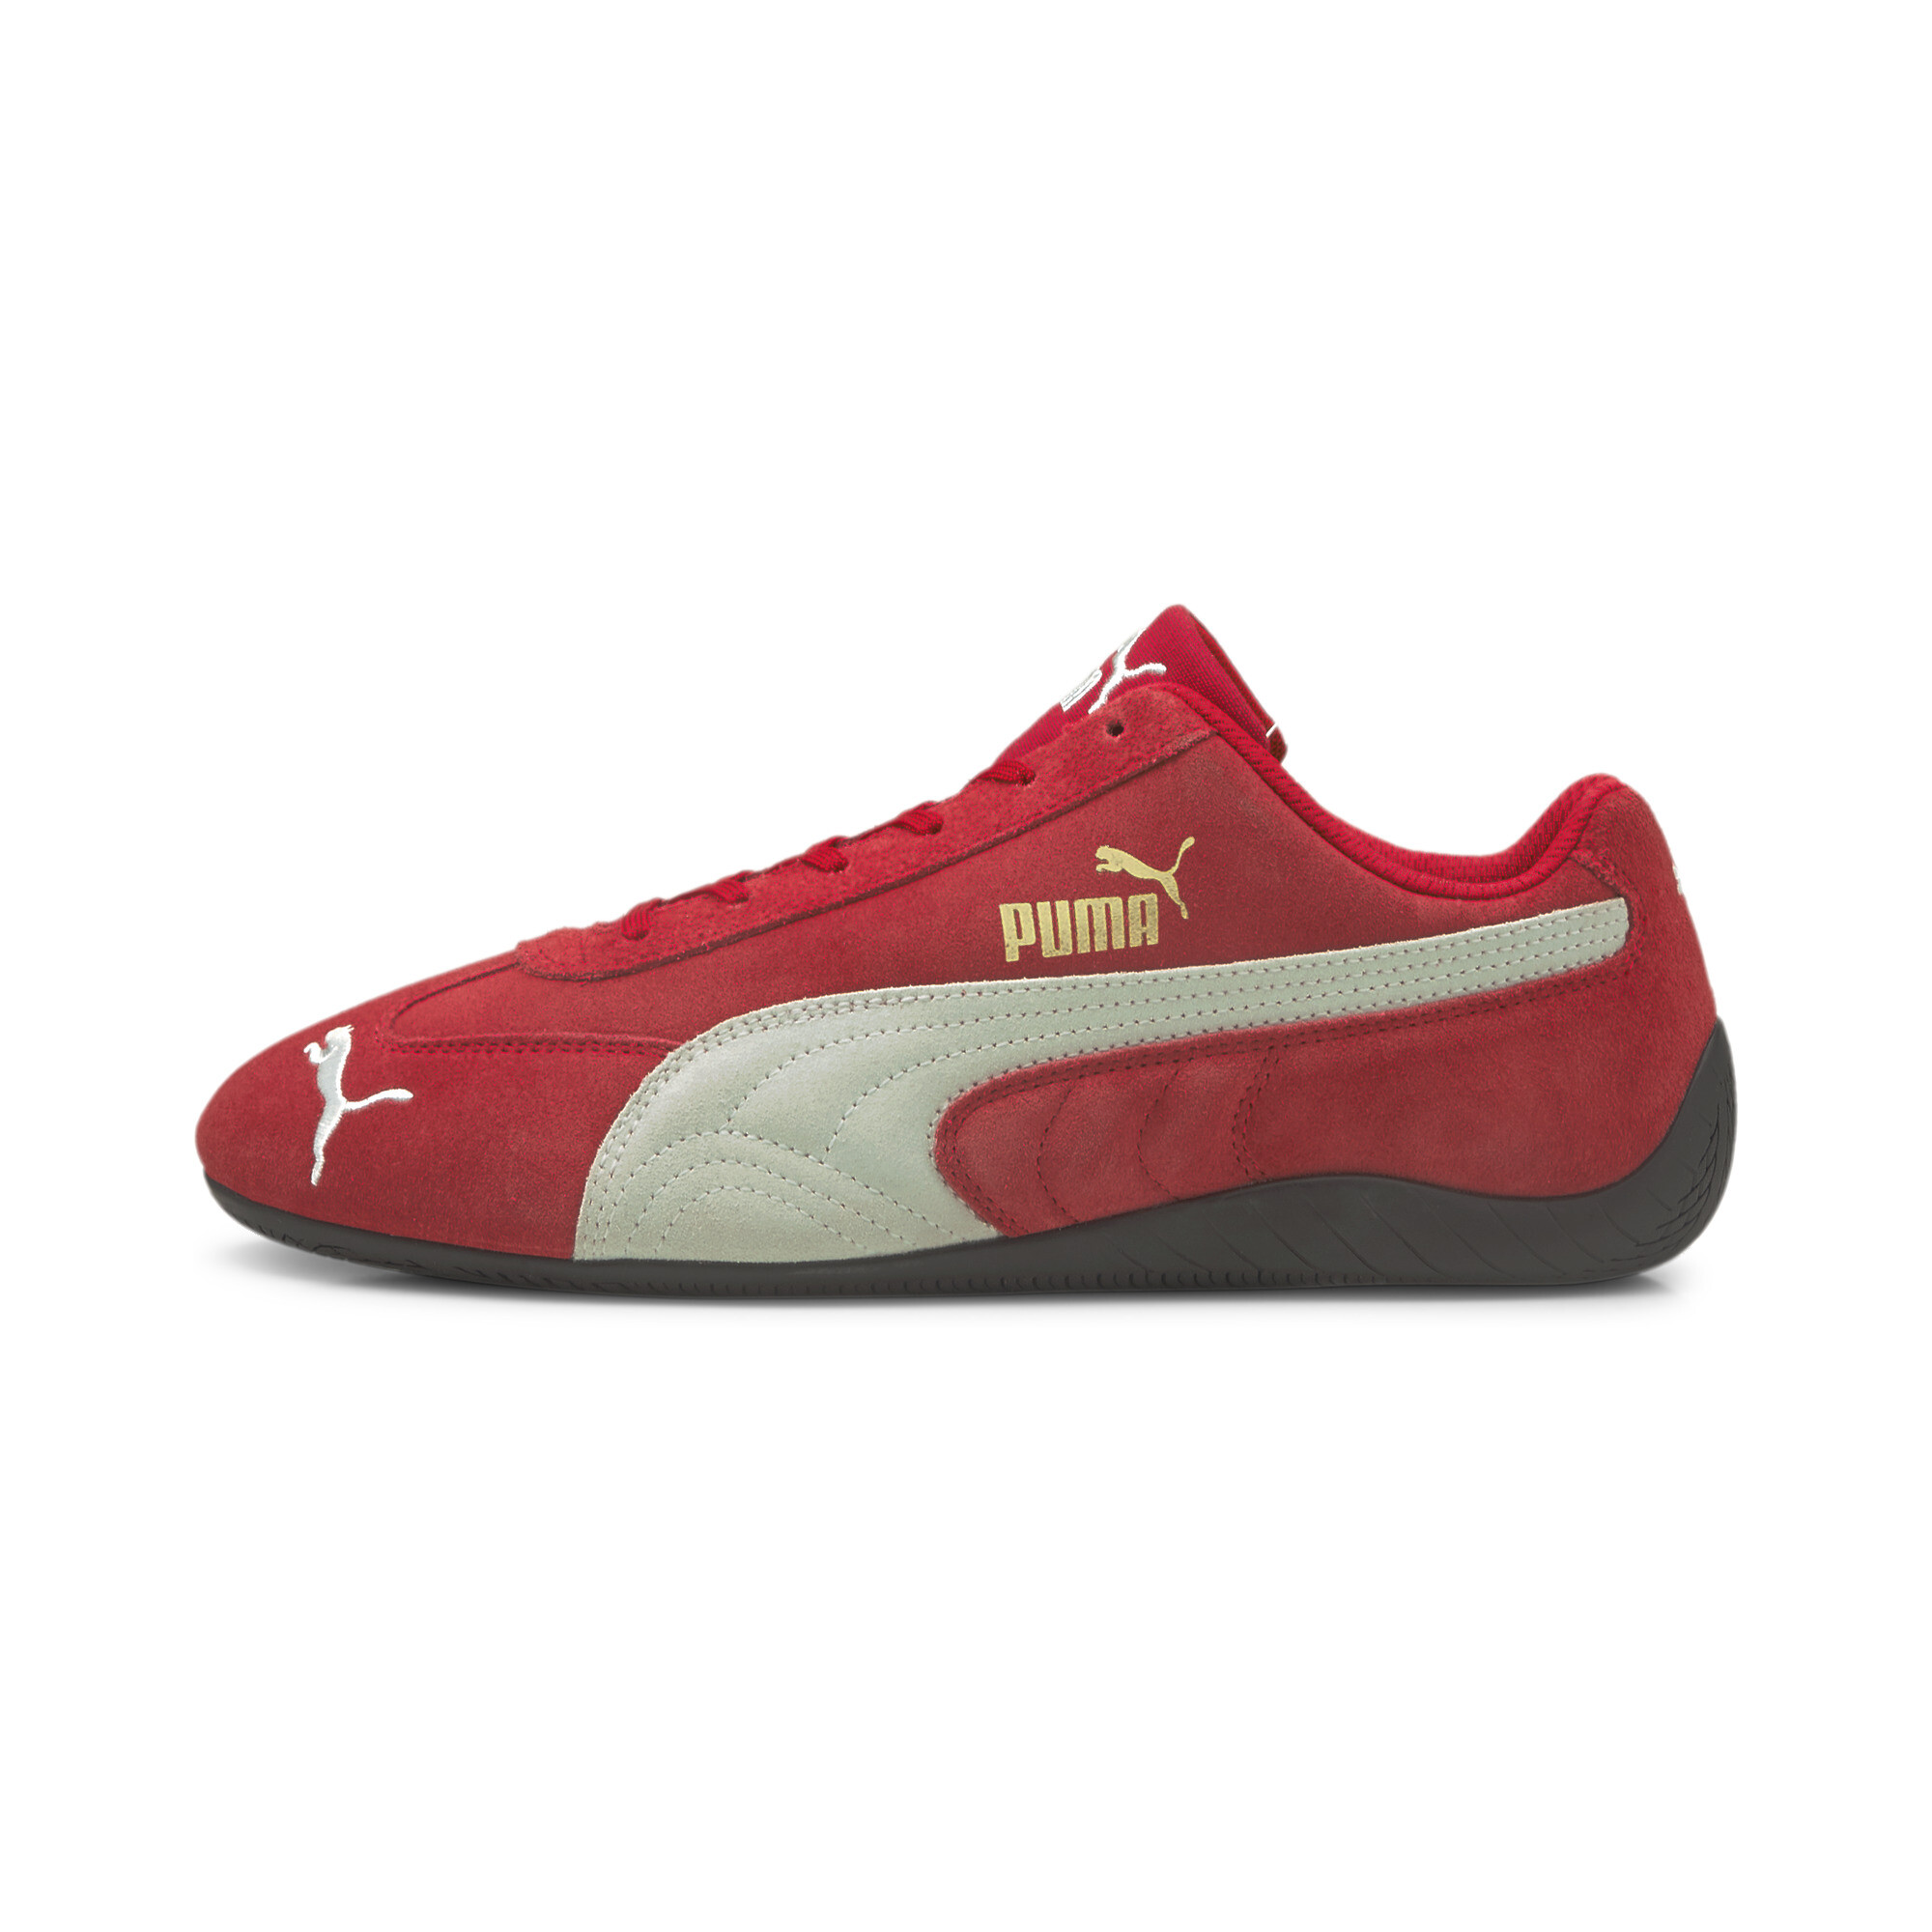 PUMA SpeedCat LS Low Top Lace Up Suede Driving Shoes Trainers - Unisex ...